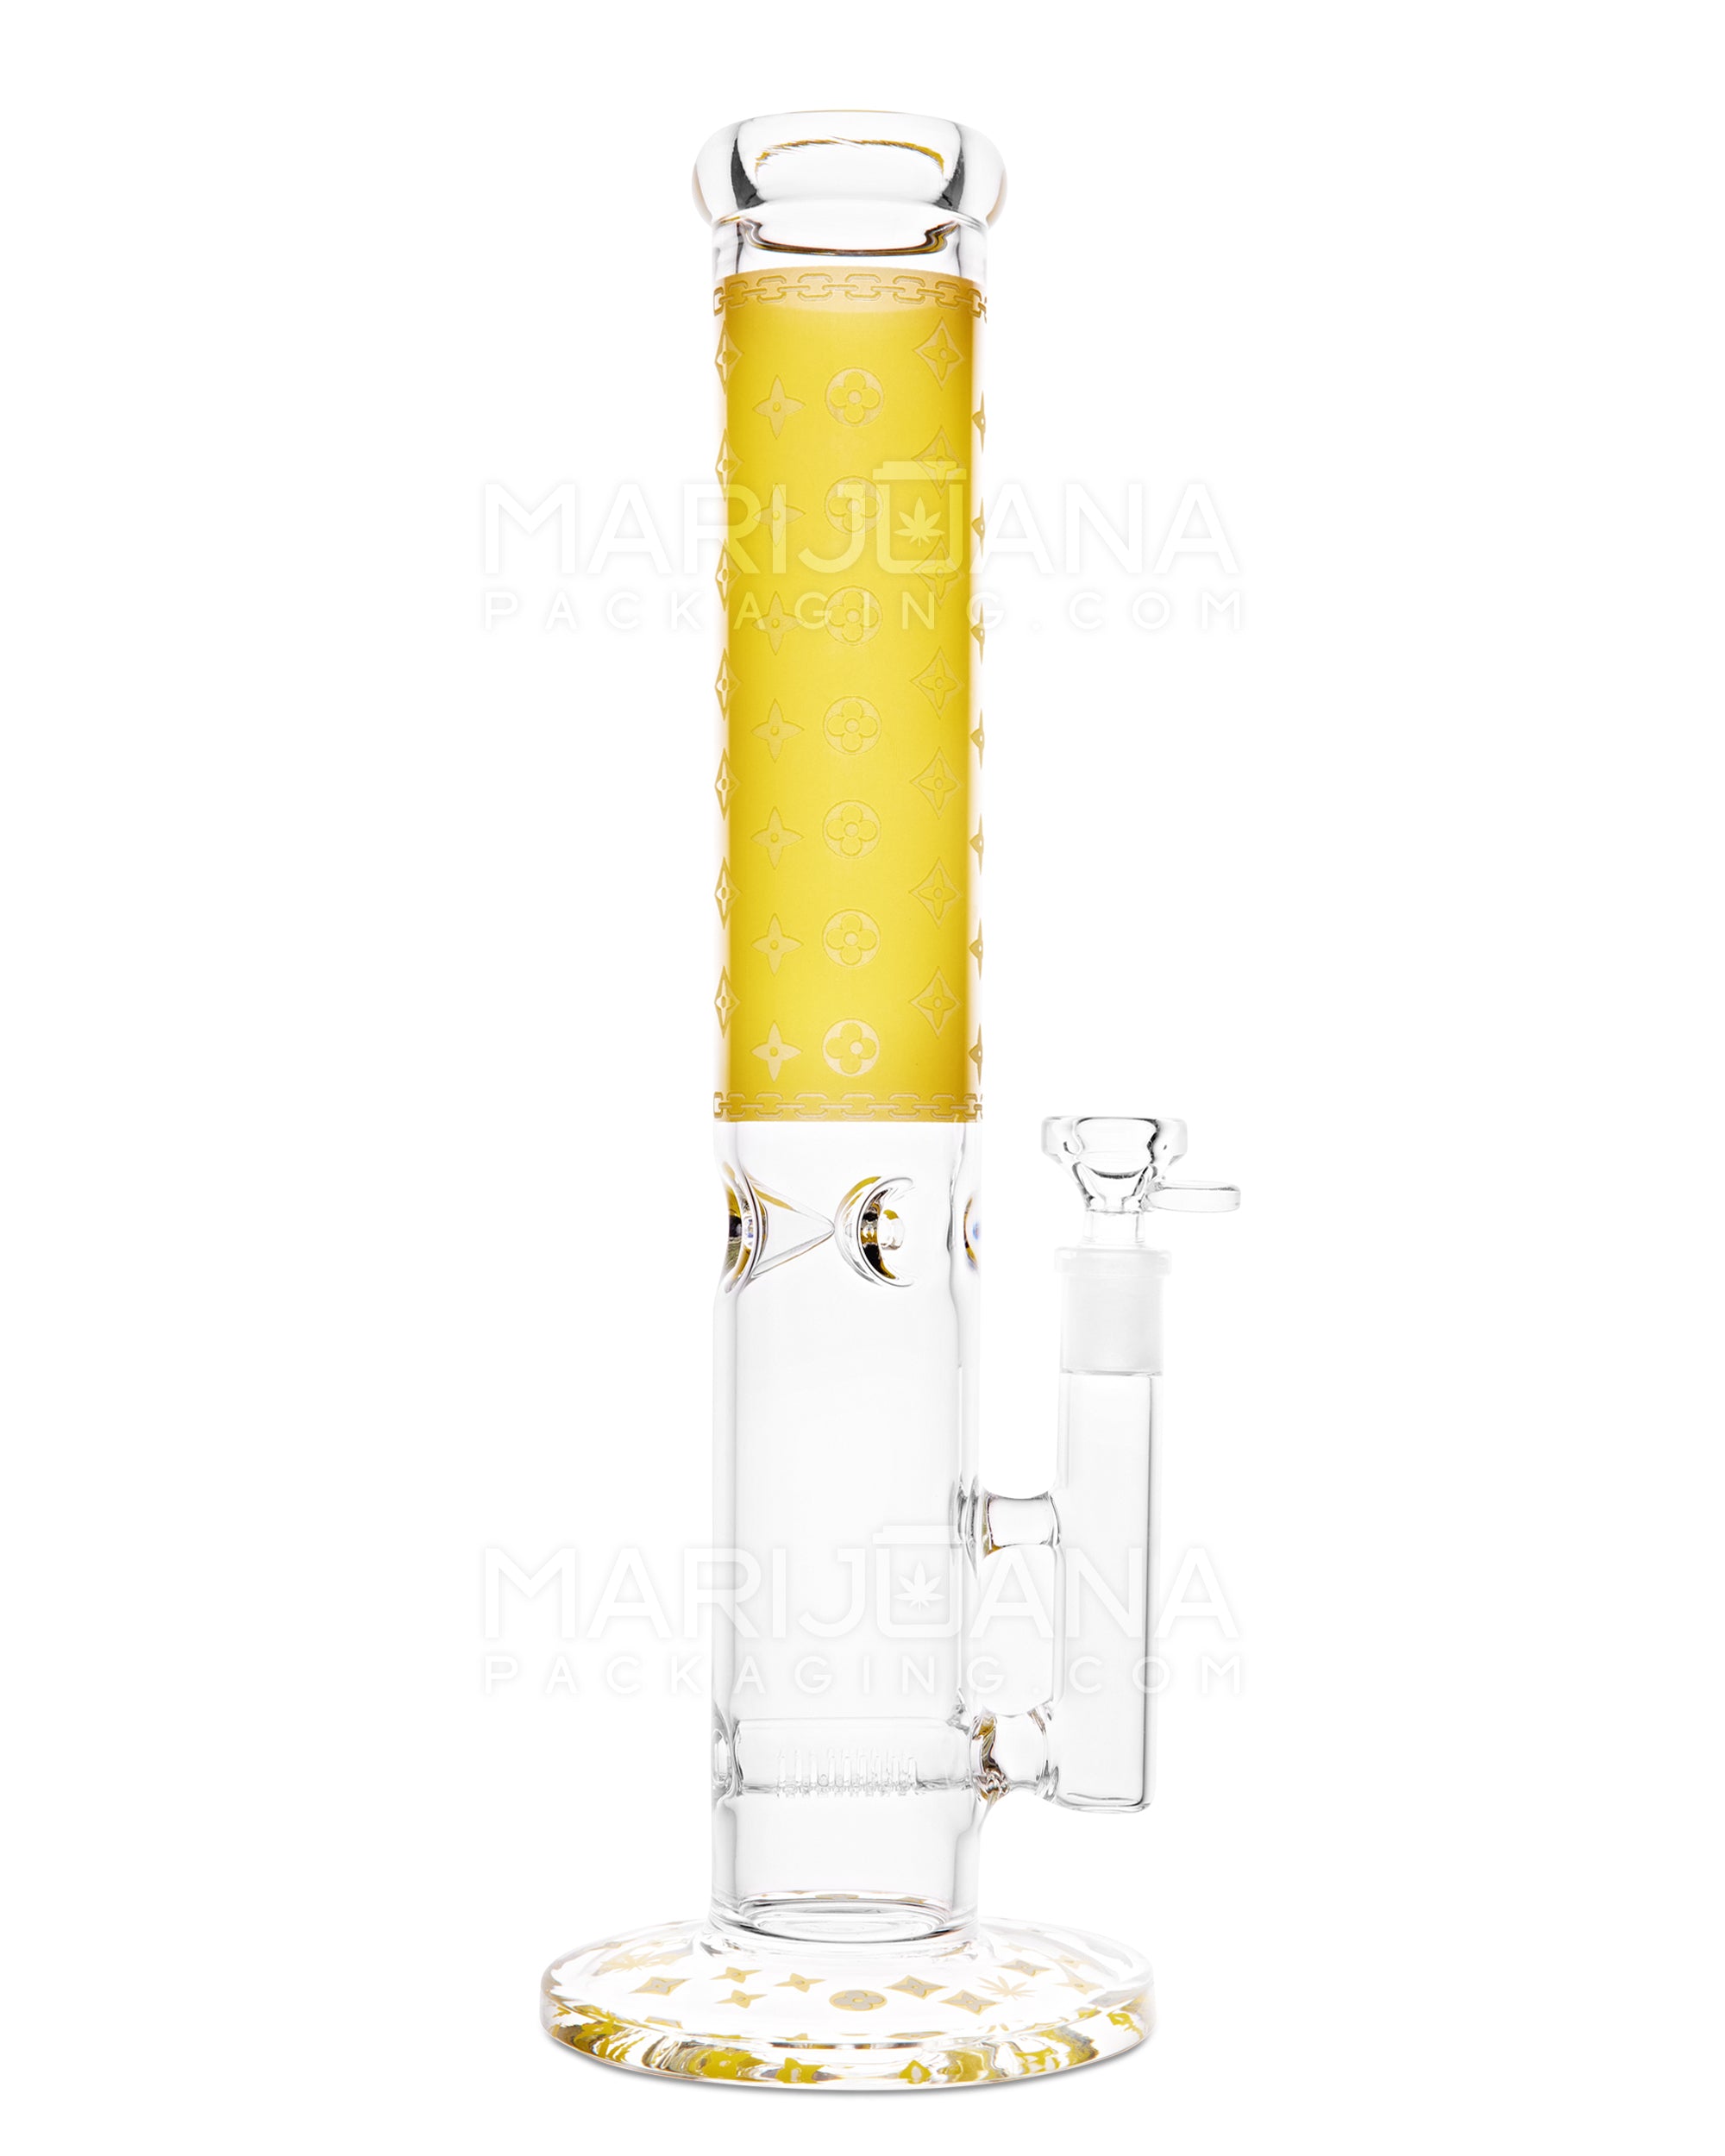 Straight Neck Luxury Design Inline Perc Glass Water Pipe w/ Ice Catcher | 14in Tall - 14mm Bowl - Yellow - 1